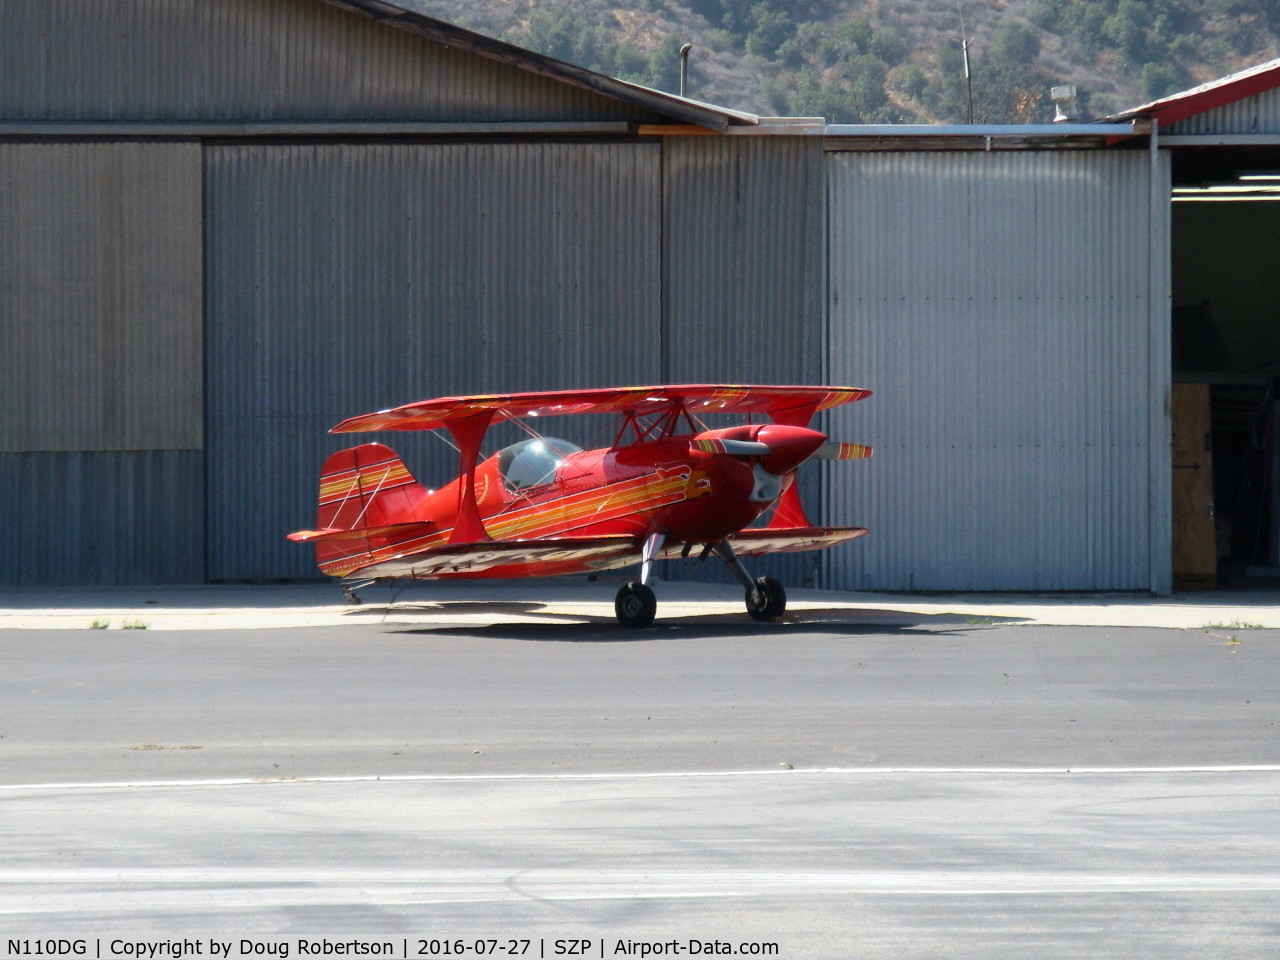 N110DG, 1990 Pitts S-1 Special C/N 1 (N110DG), 1990 Green PITTS S-1 SPECIAL, Lycoming O-540, single seat Experimental class